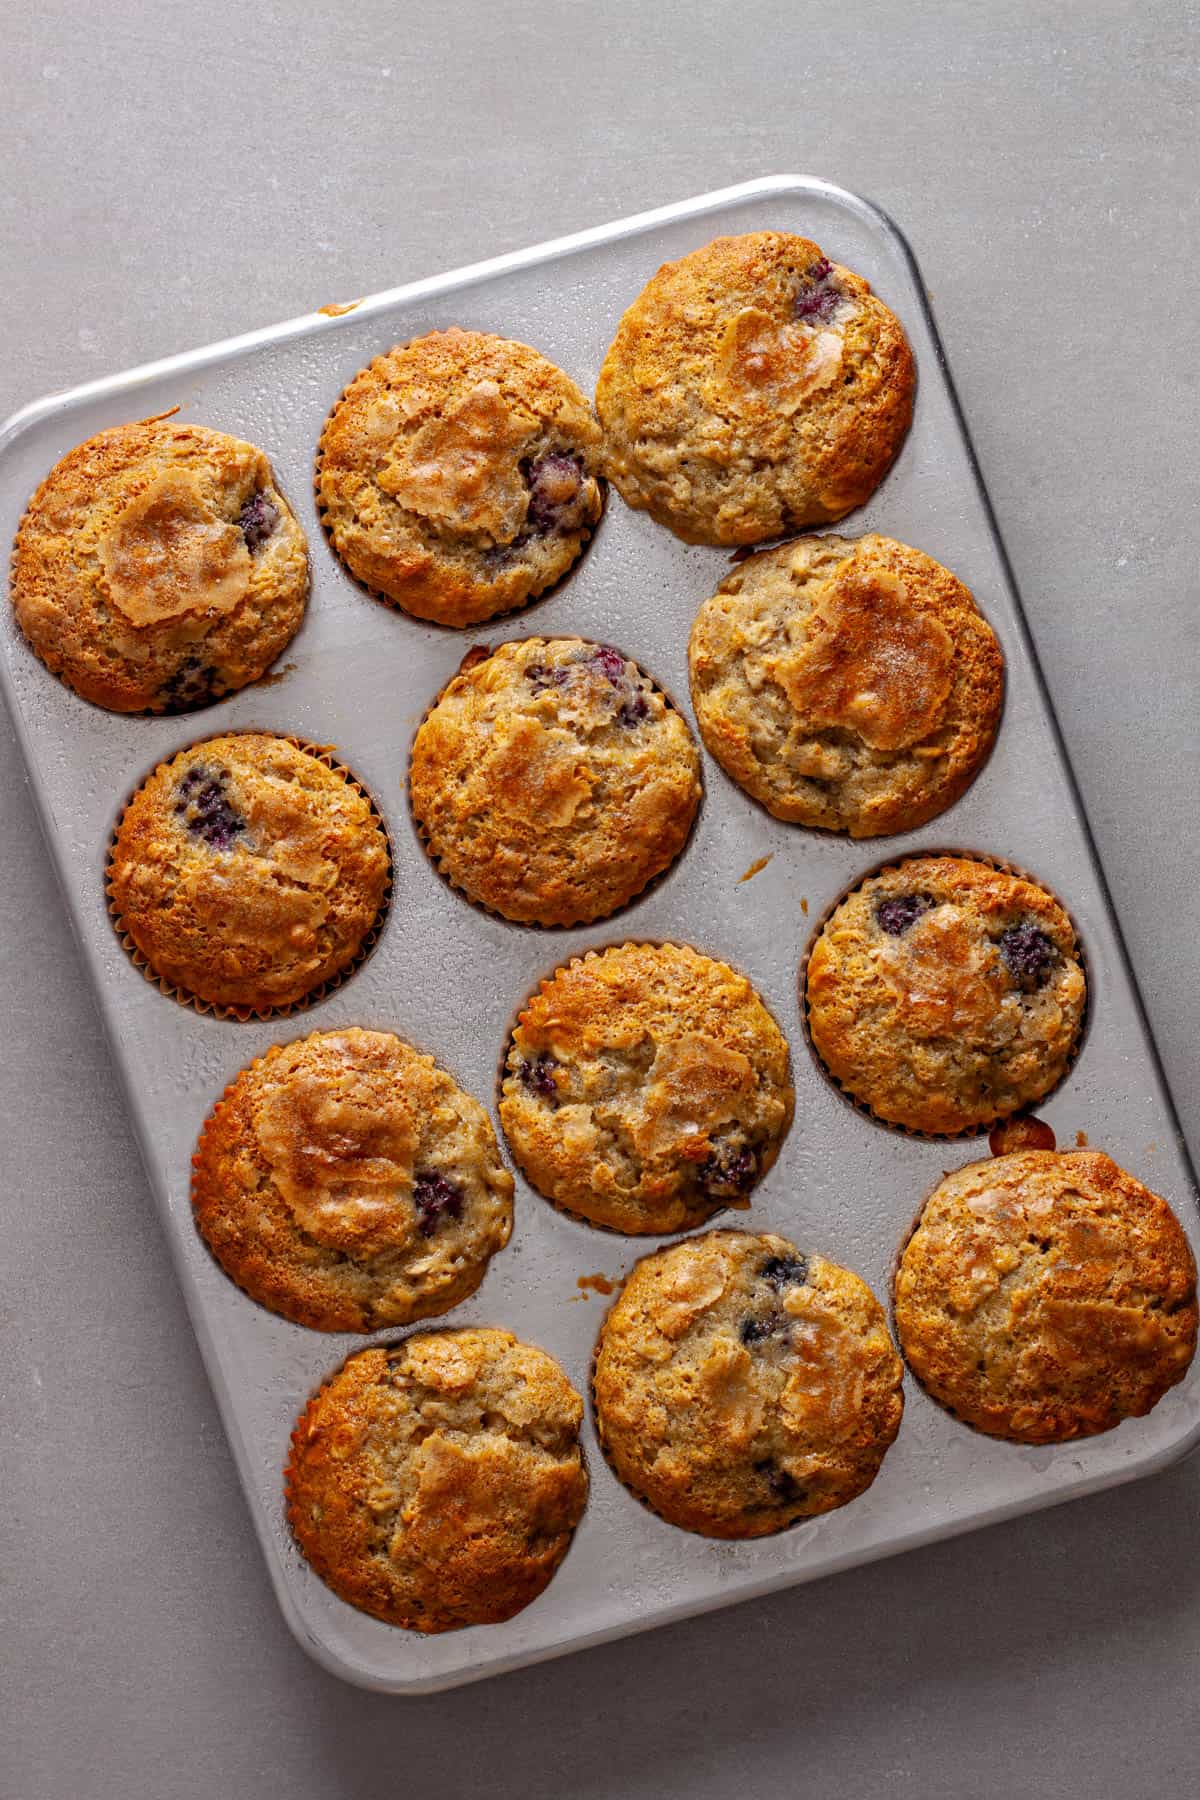 A muffin tin with blackberry banana oat muffins golden brown and fresh out of the oven.